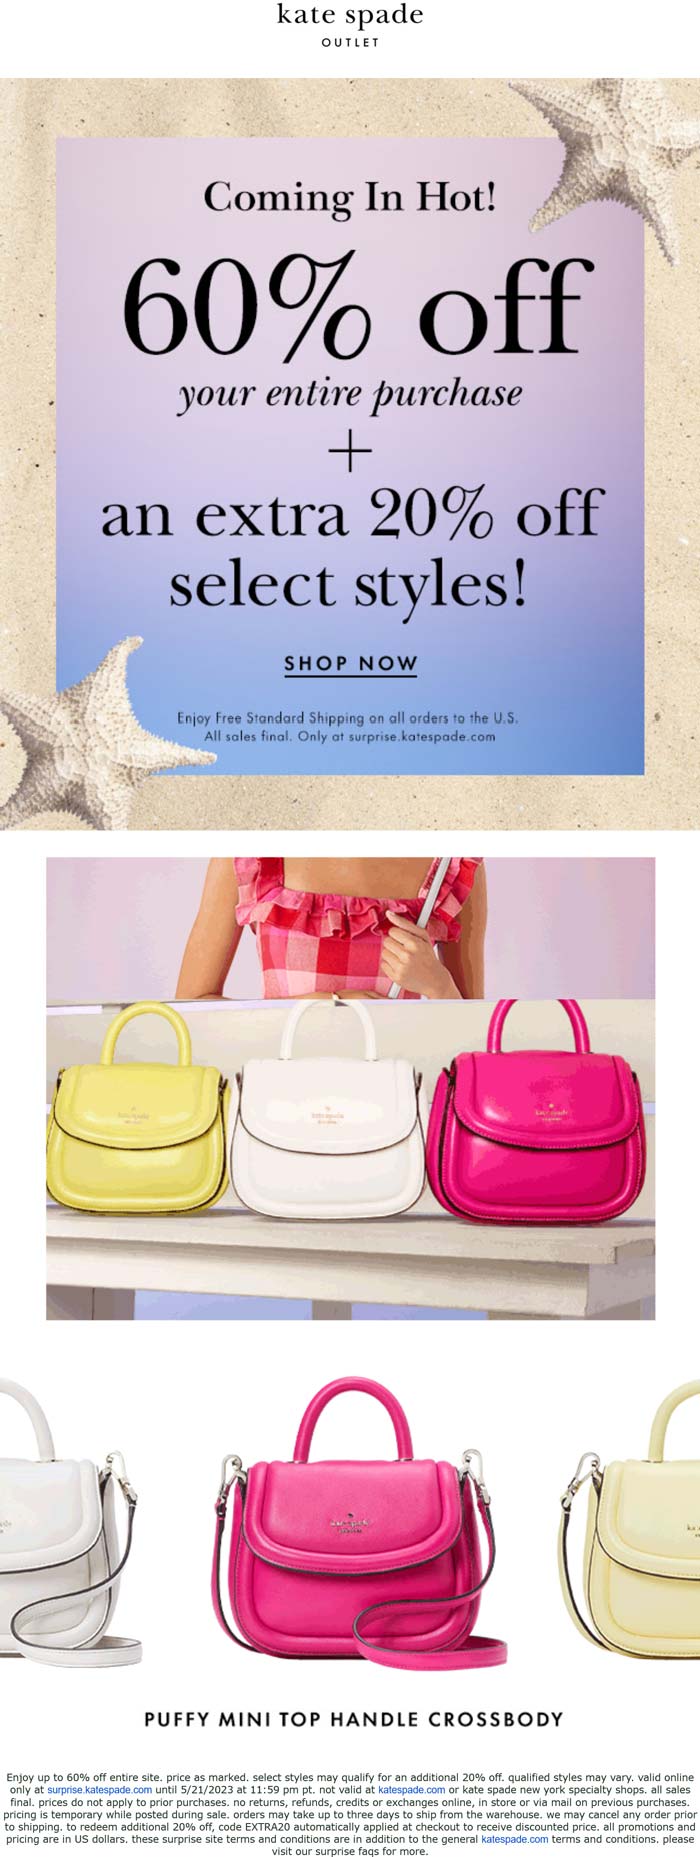 Kate Spade Outlet stores Coupon  Extra 20% off & more at Kate Spade Outlet #katespadeoutlet 